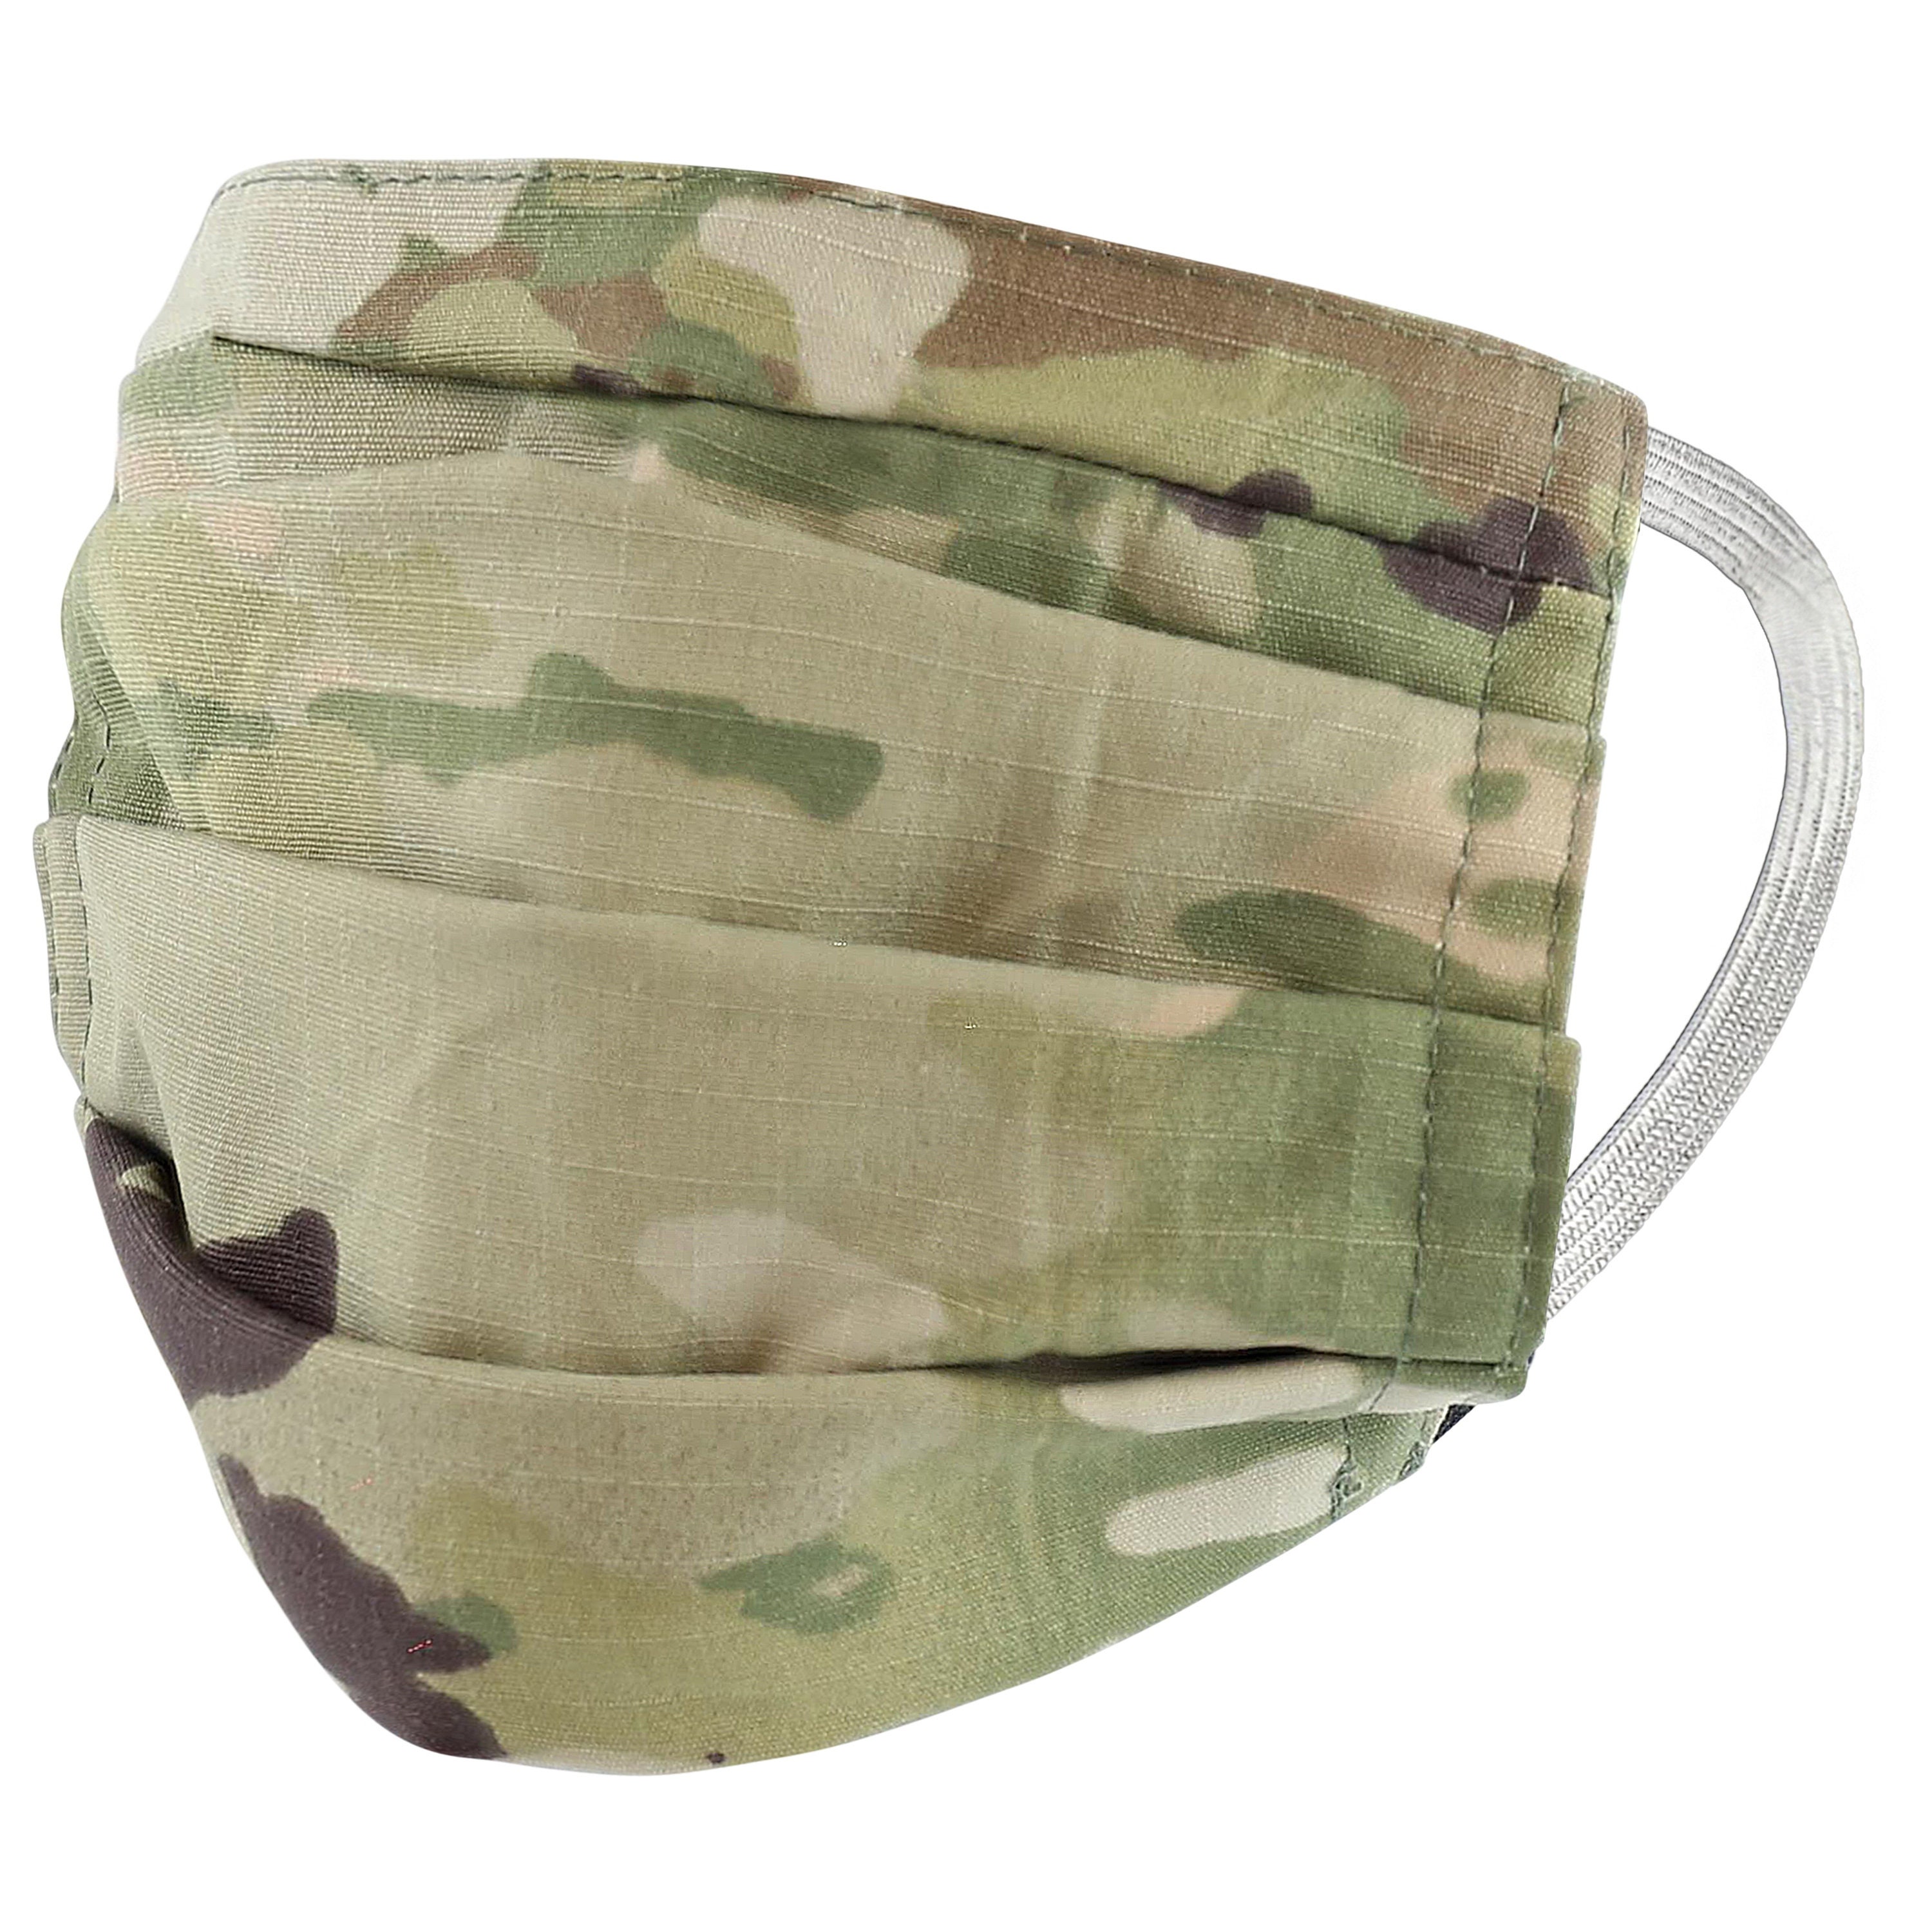 Washable Face Mask 3-Ply Cotton Blend Military Fabric - Reusable Cloth Cover With Filter Pocket